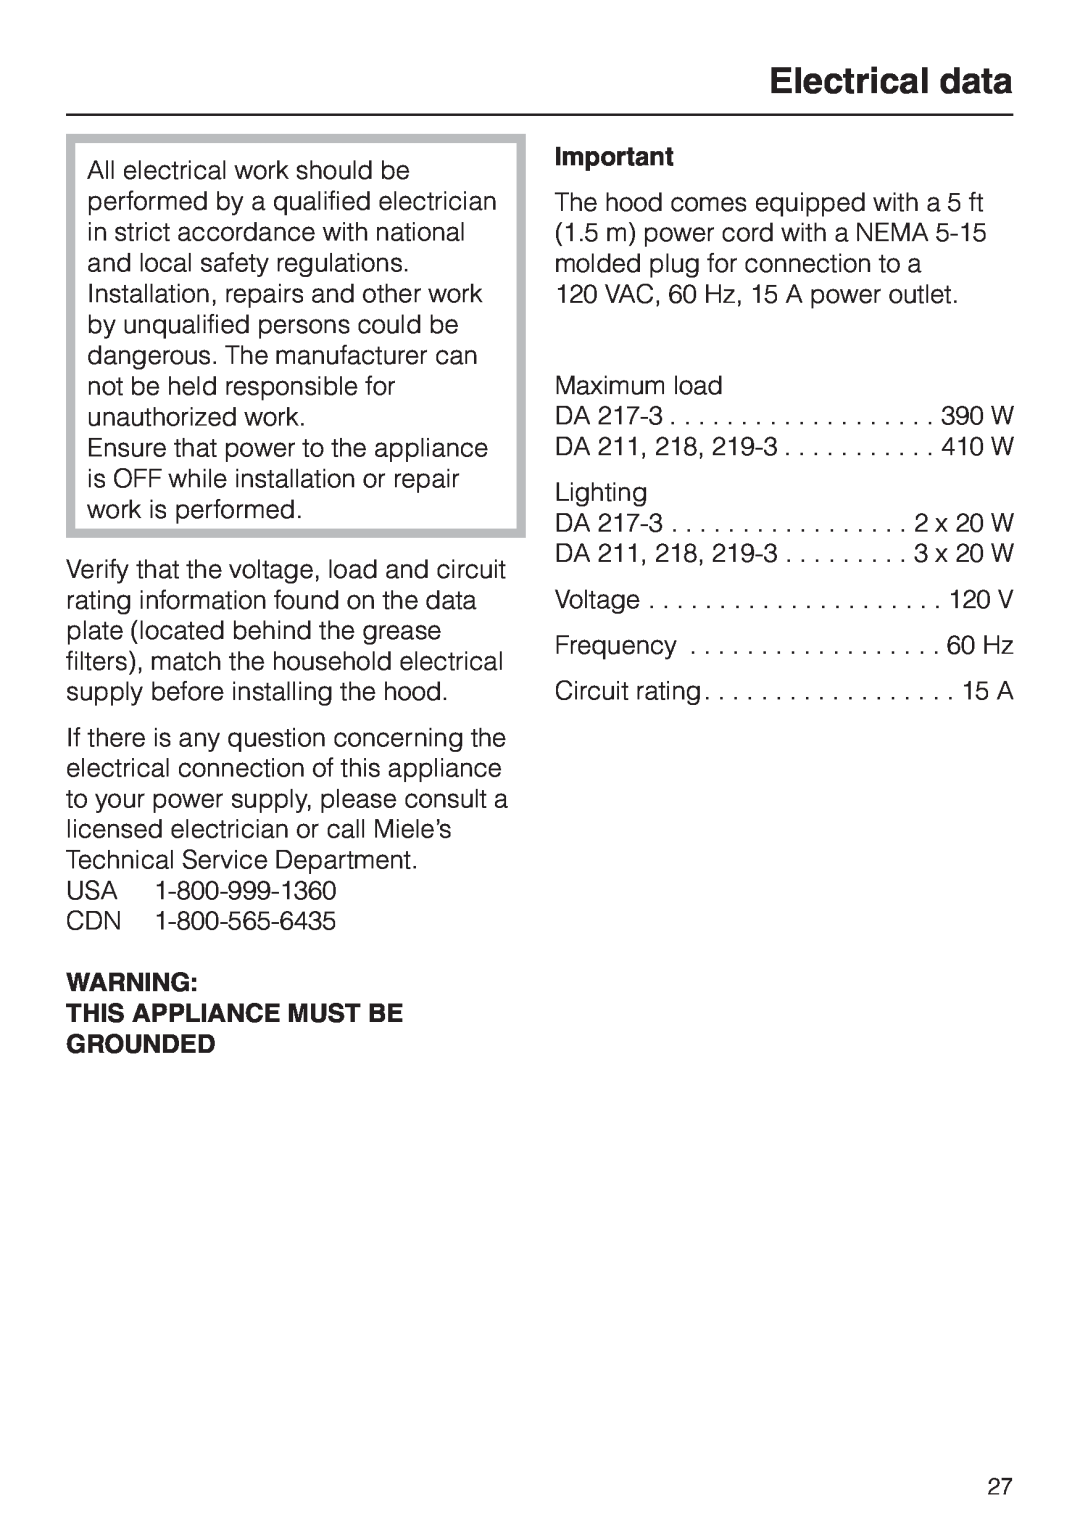 Miele DA 219-3, DA217-3 installation instructions Electrical data, This Appliance Must Be Grounded 